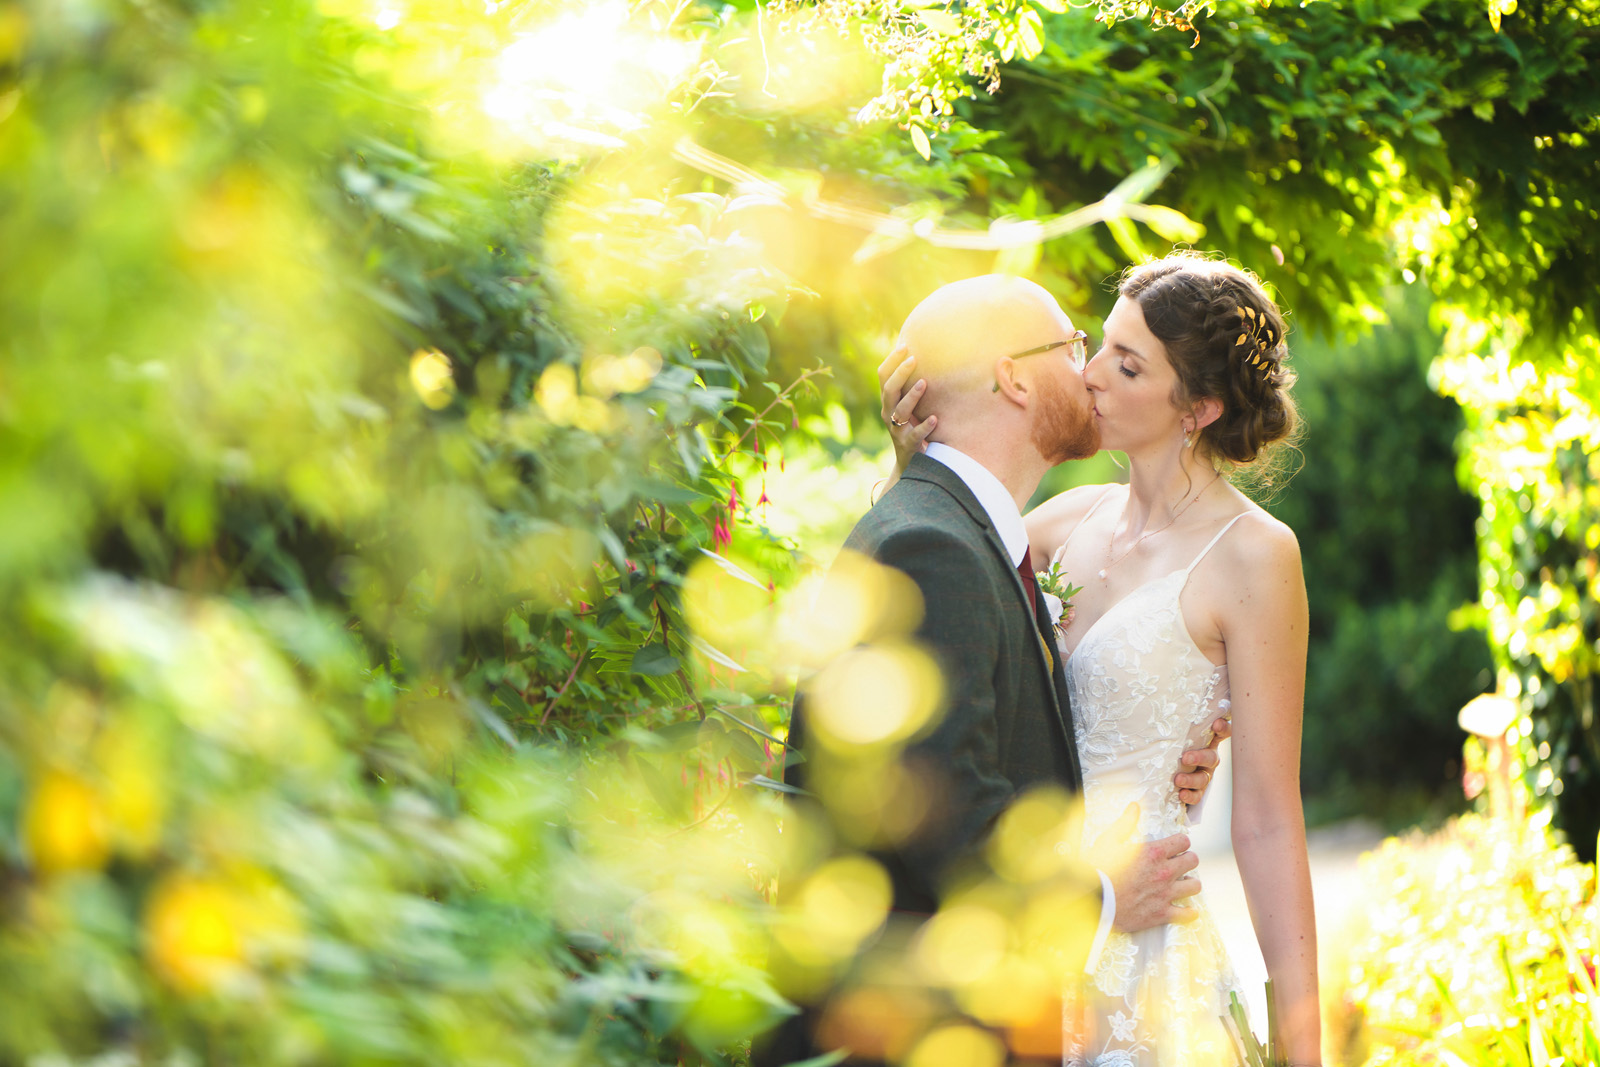 Wedding Photography at the Walled Garden Old Down Estate